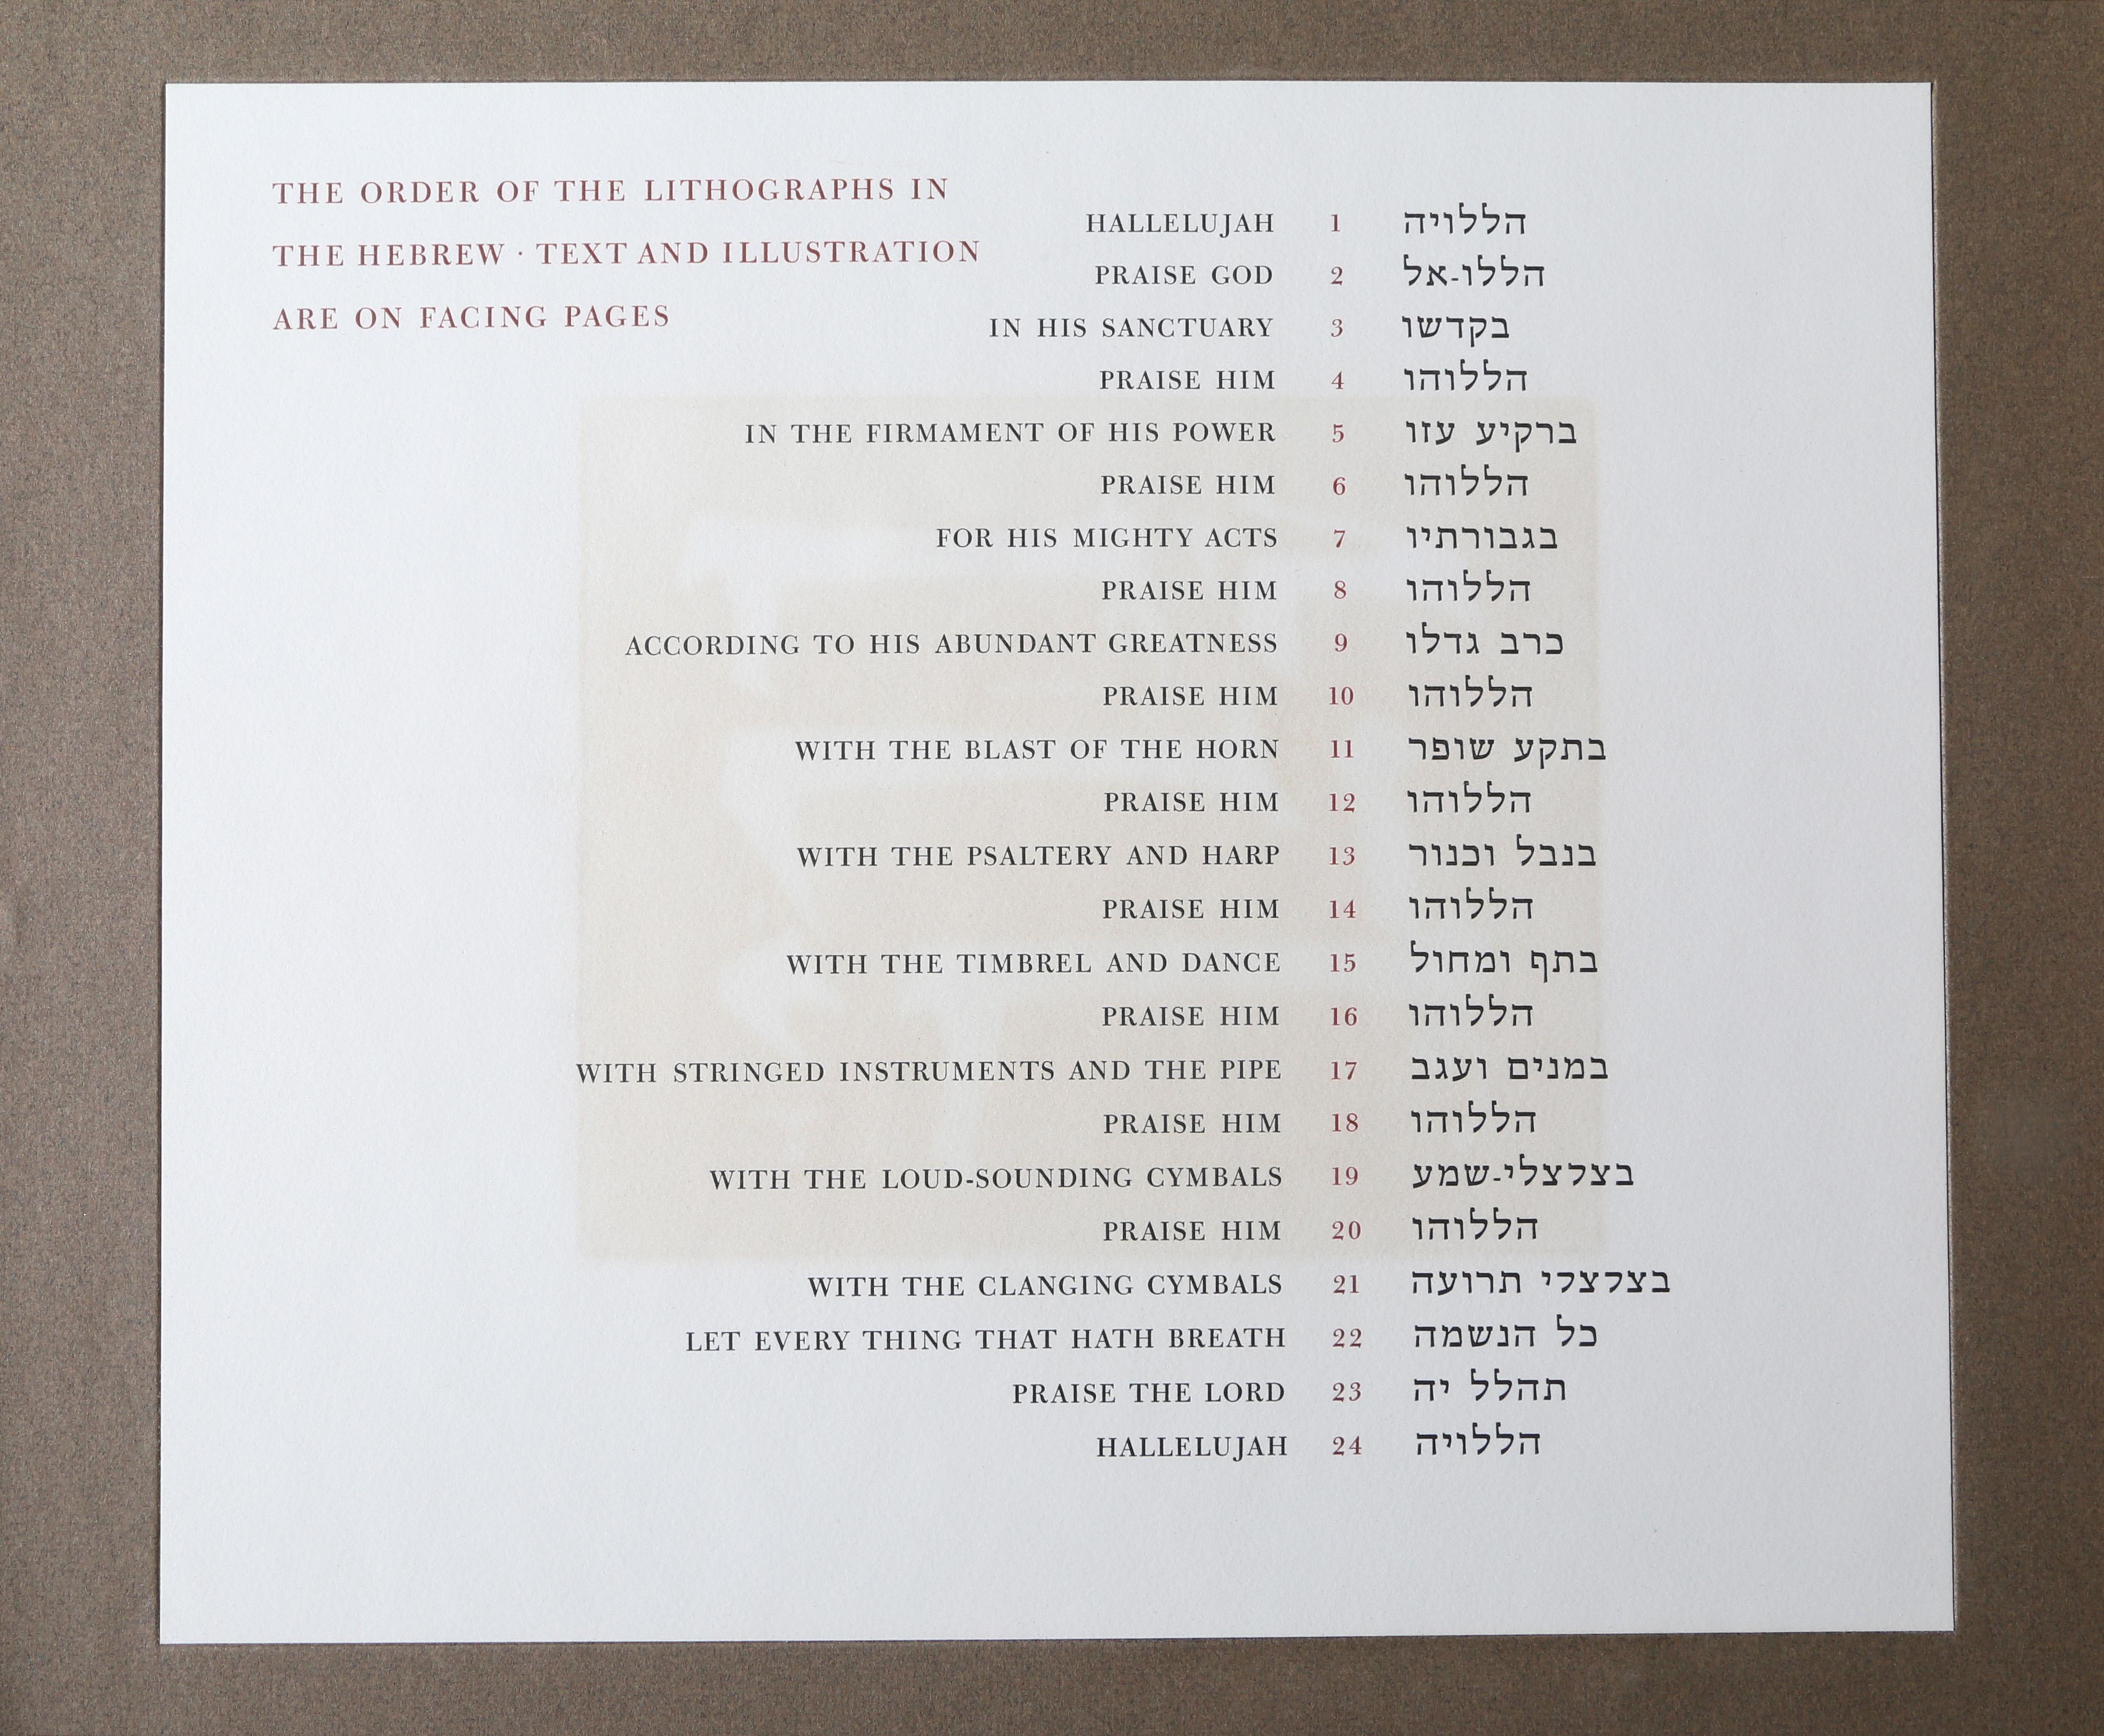 The Hallelelujah Portfolio by Ben Shahn Illustrating the 150th Psalm from the Old Testament of the Holy Bible.  Including an introduction by Bernarda Bryson Shahn and with a letter from Fernand Mourlot.  Contains 24 prints in original portfolio